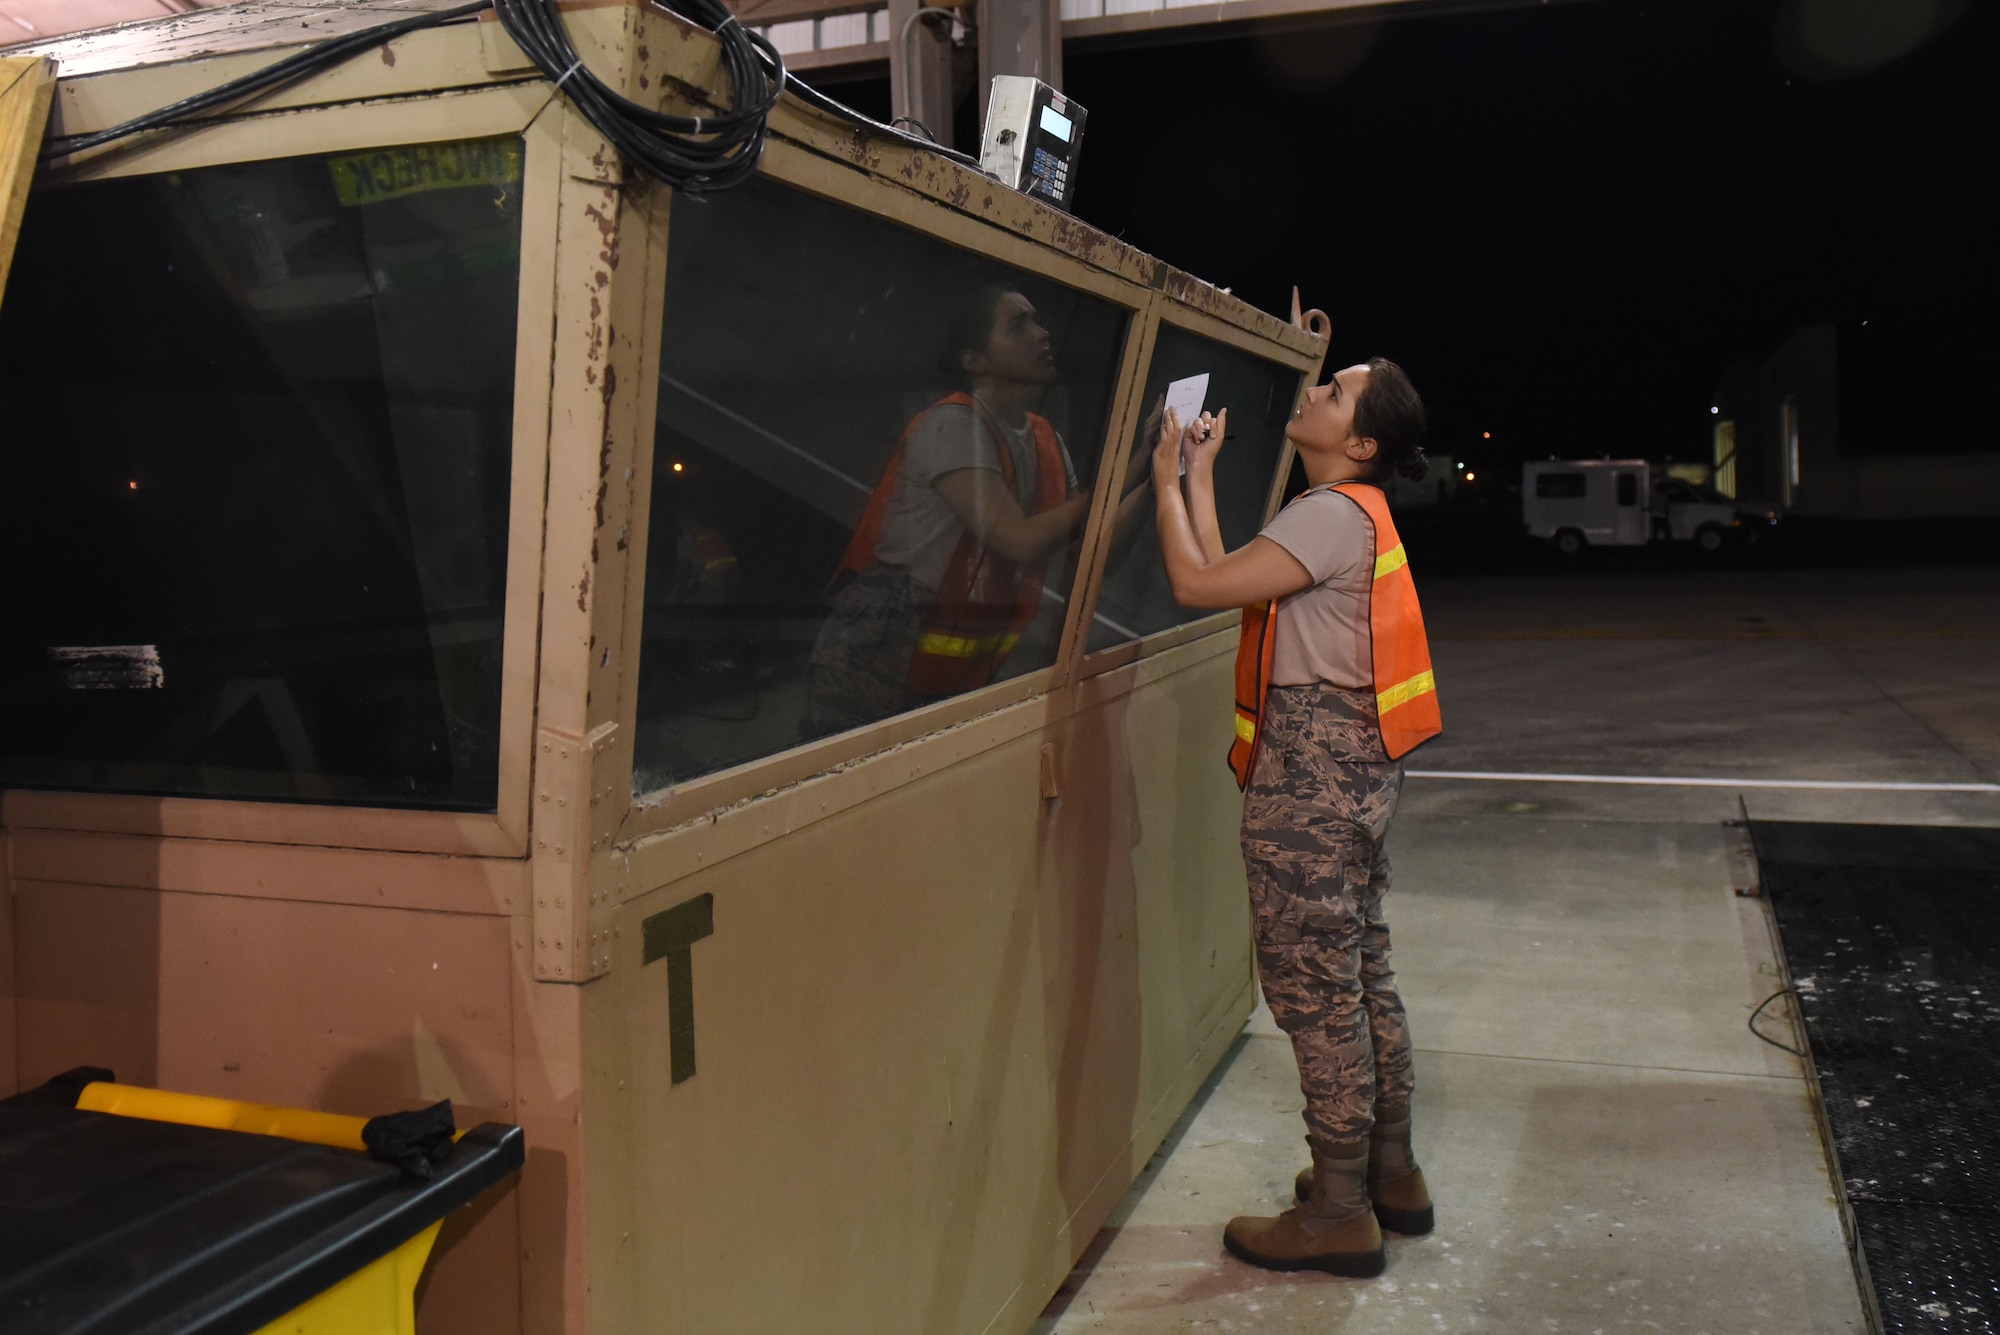 Airman 1st Class Mackenzie Sones, 4th Logistics Readiness Squadron receiving technician, records the cargo weight during exercise Thunderdome 17-02, July 20, 2017, at Seymour Johnson Air Force Base, North Carolina. The exercise allowed members of the 4th Fighter Wing to strengthen skills for real-world operations. (U.S. Air Force photo by Airman 1st Class Victoria Boyton)